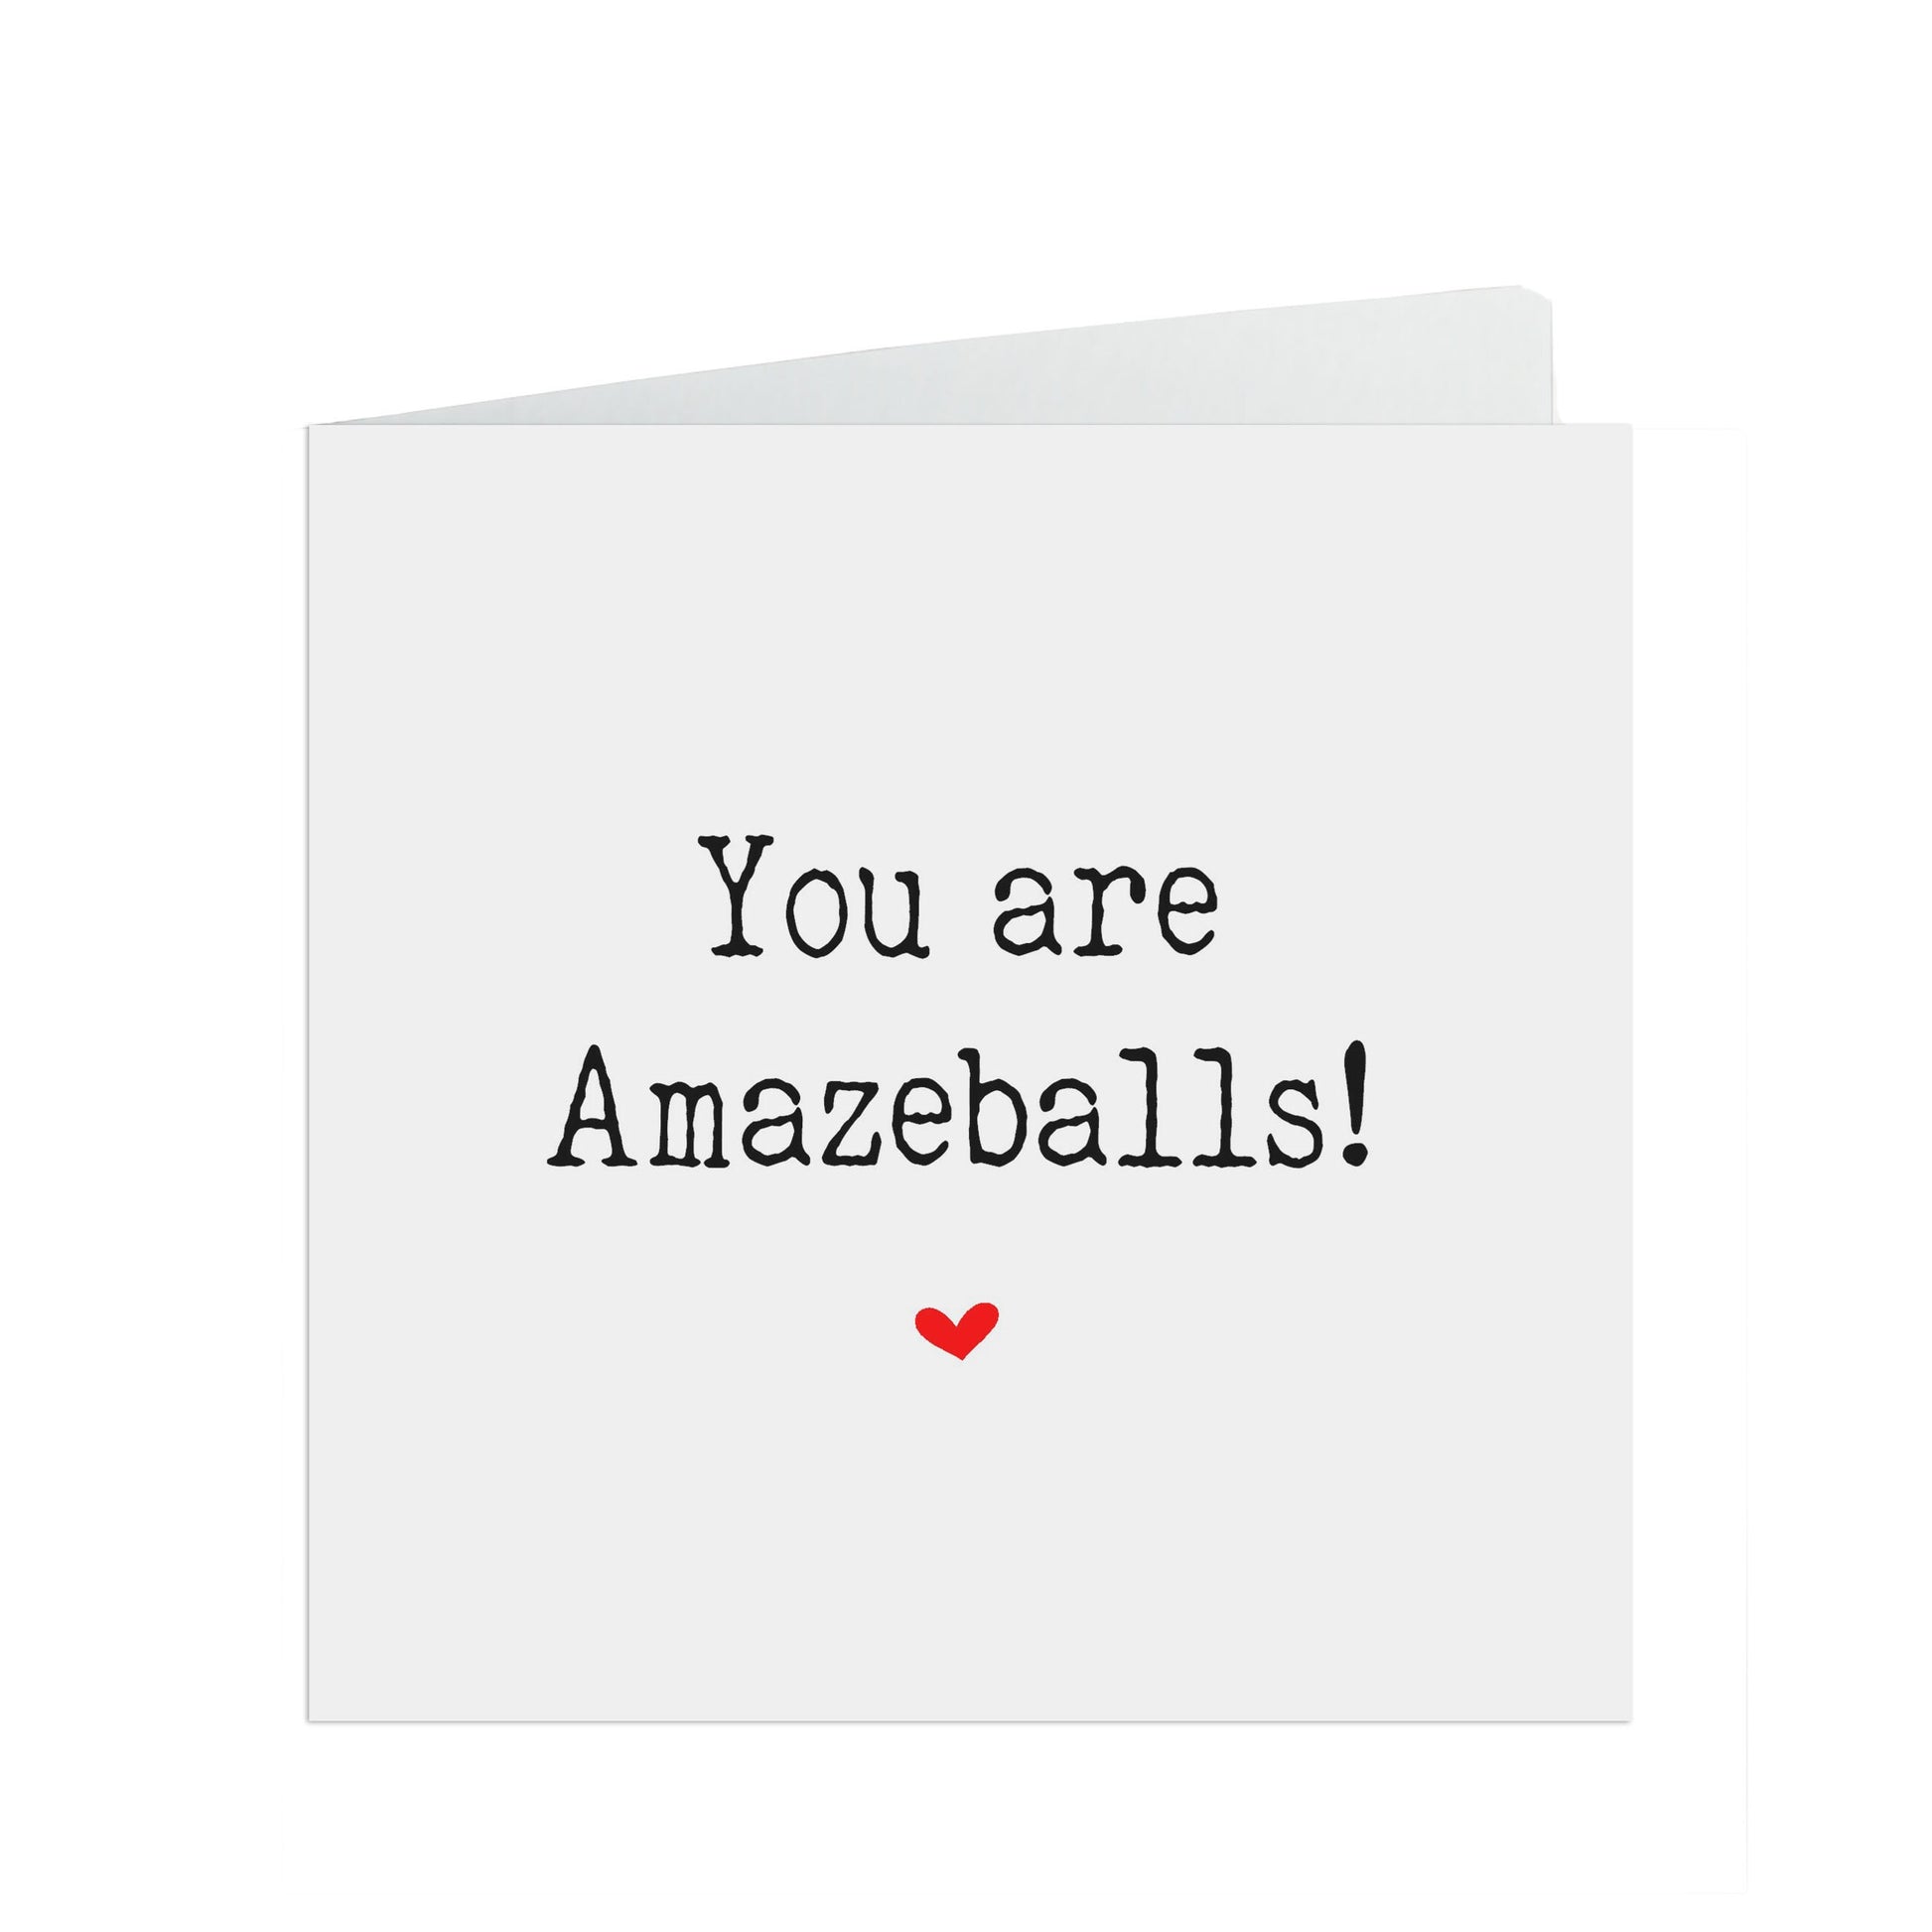 You Are Amazeballs! Motivation, Encouragement Or Support Card